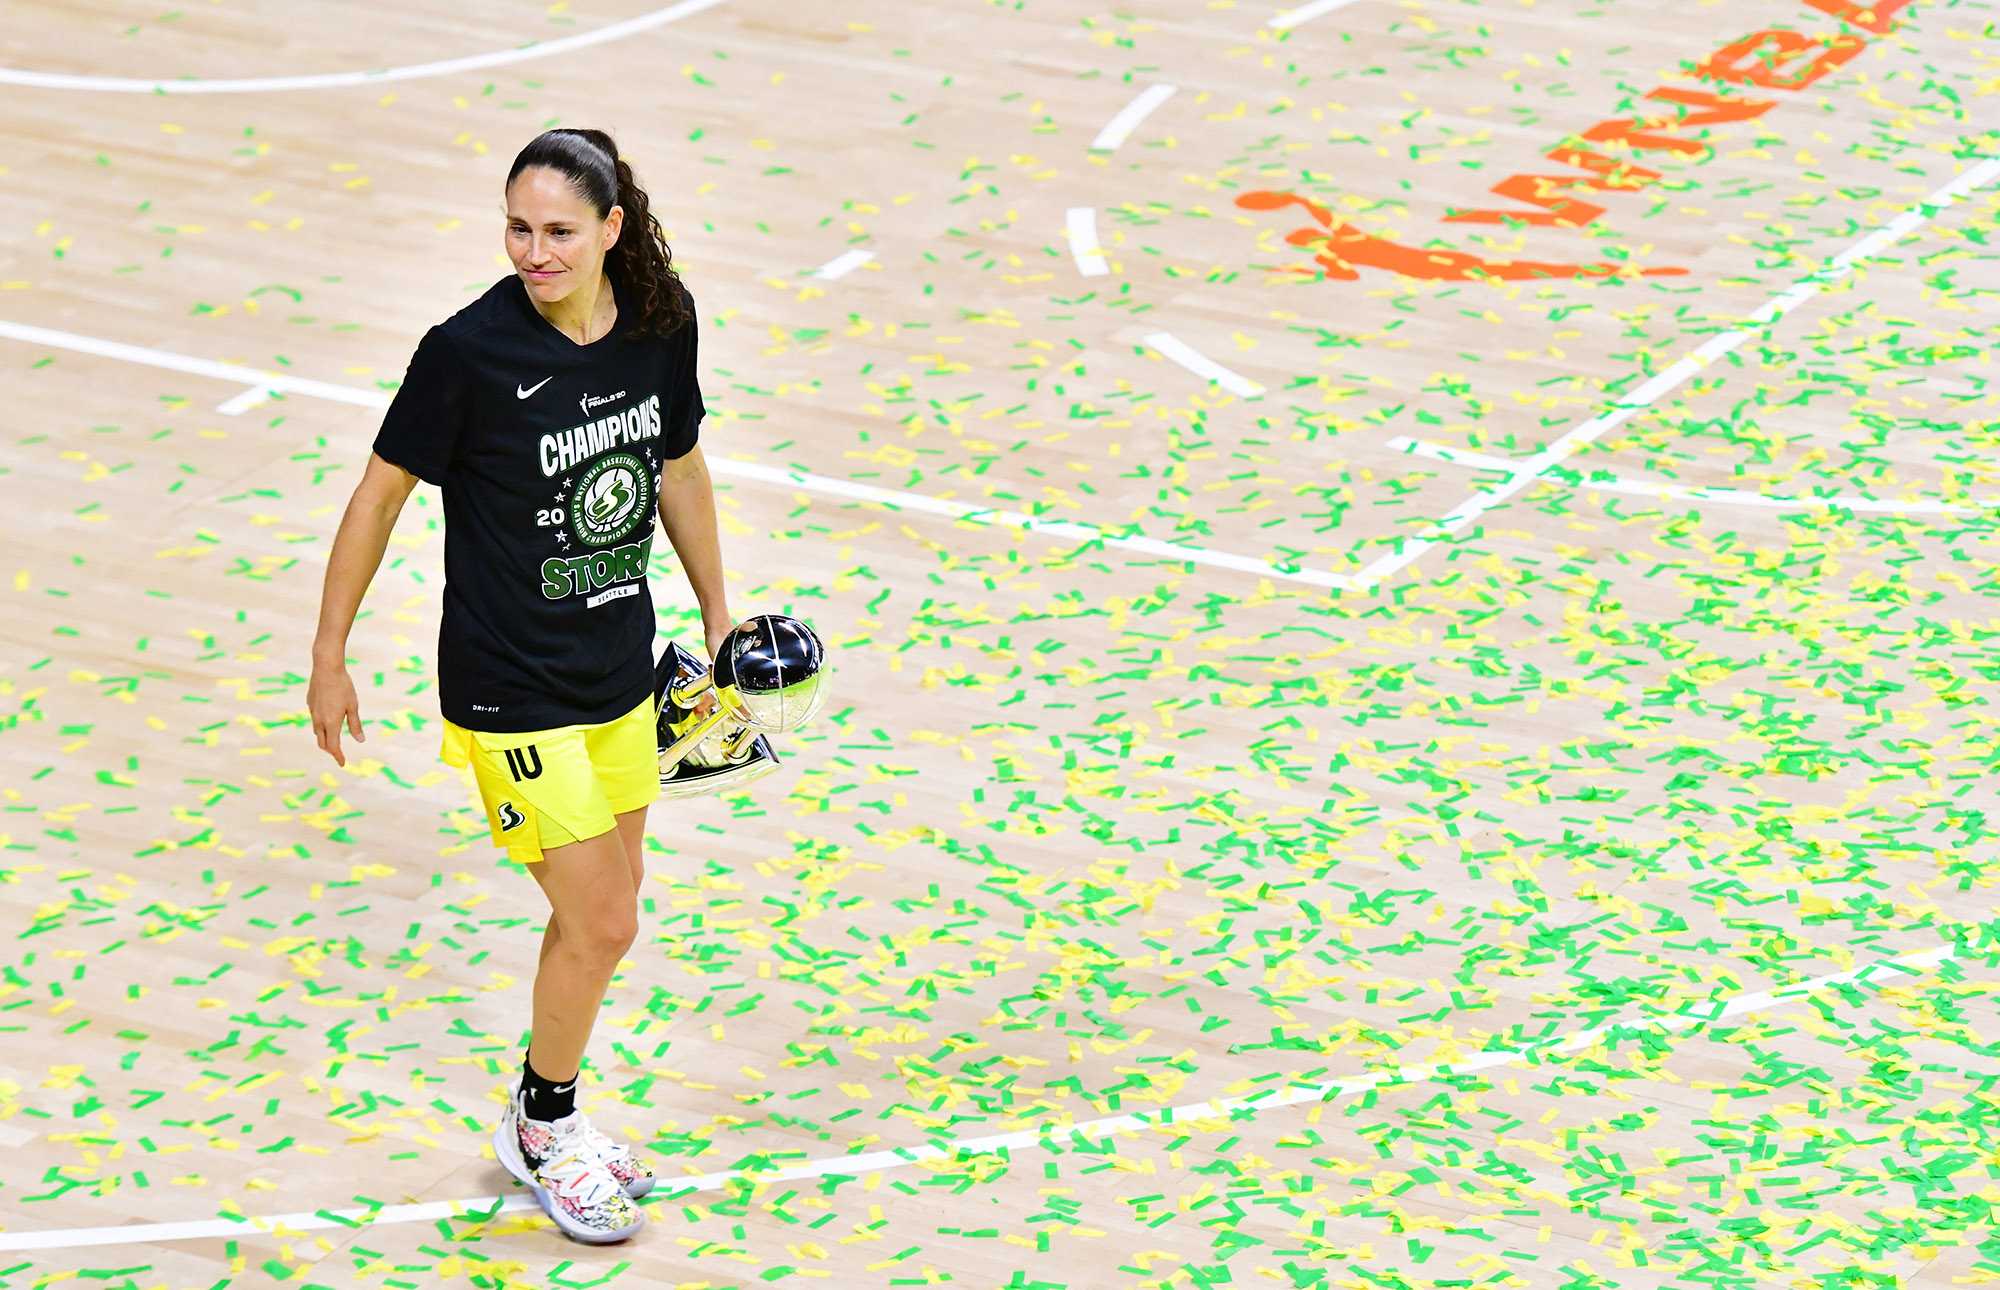 Sue Bird, WNBA star and five-time Olympic champion, will retire after 2022, WNBA